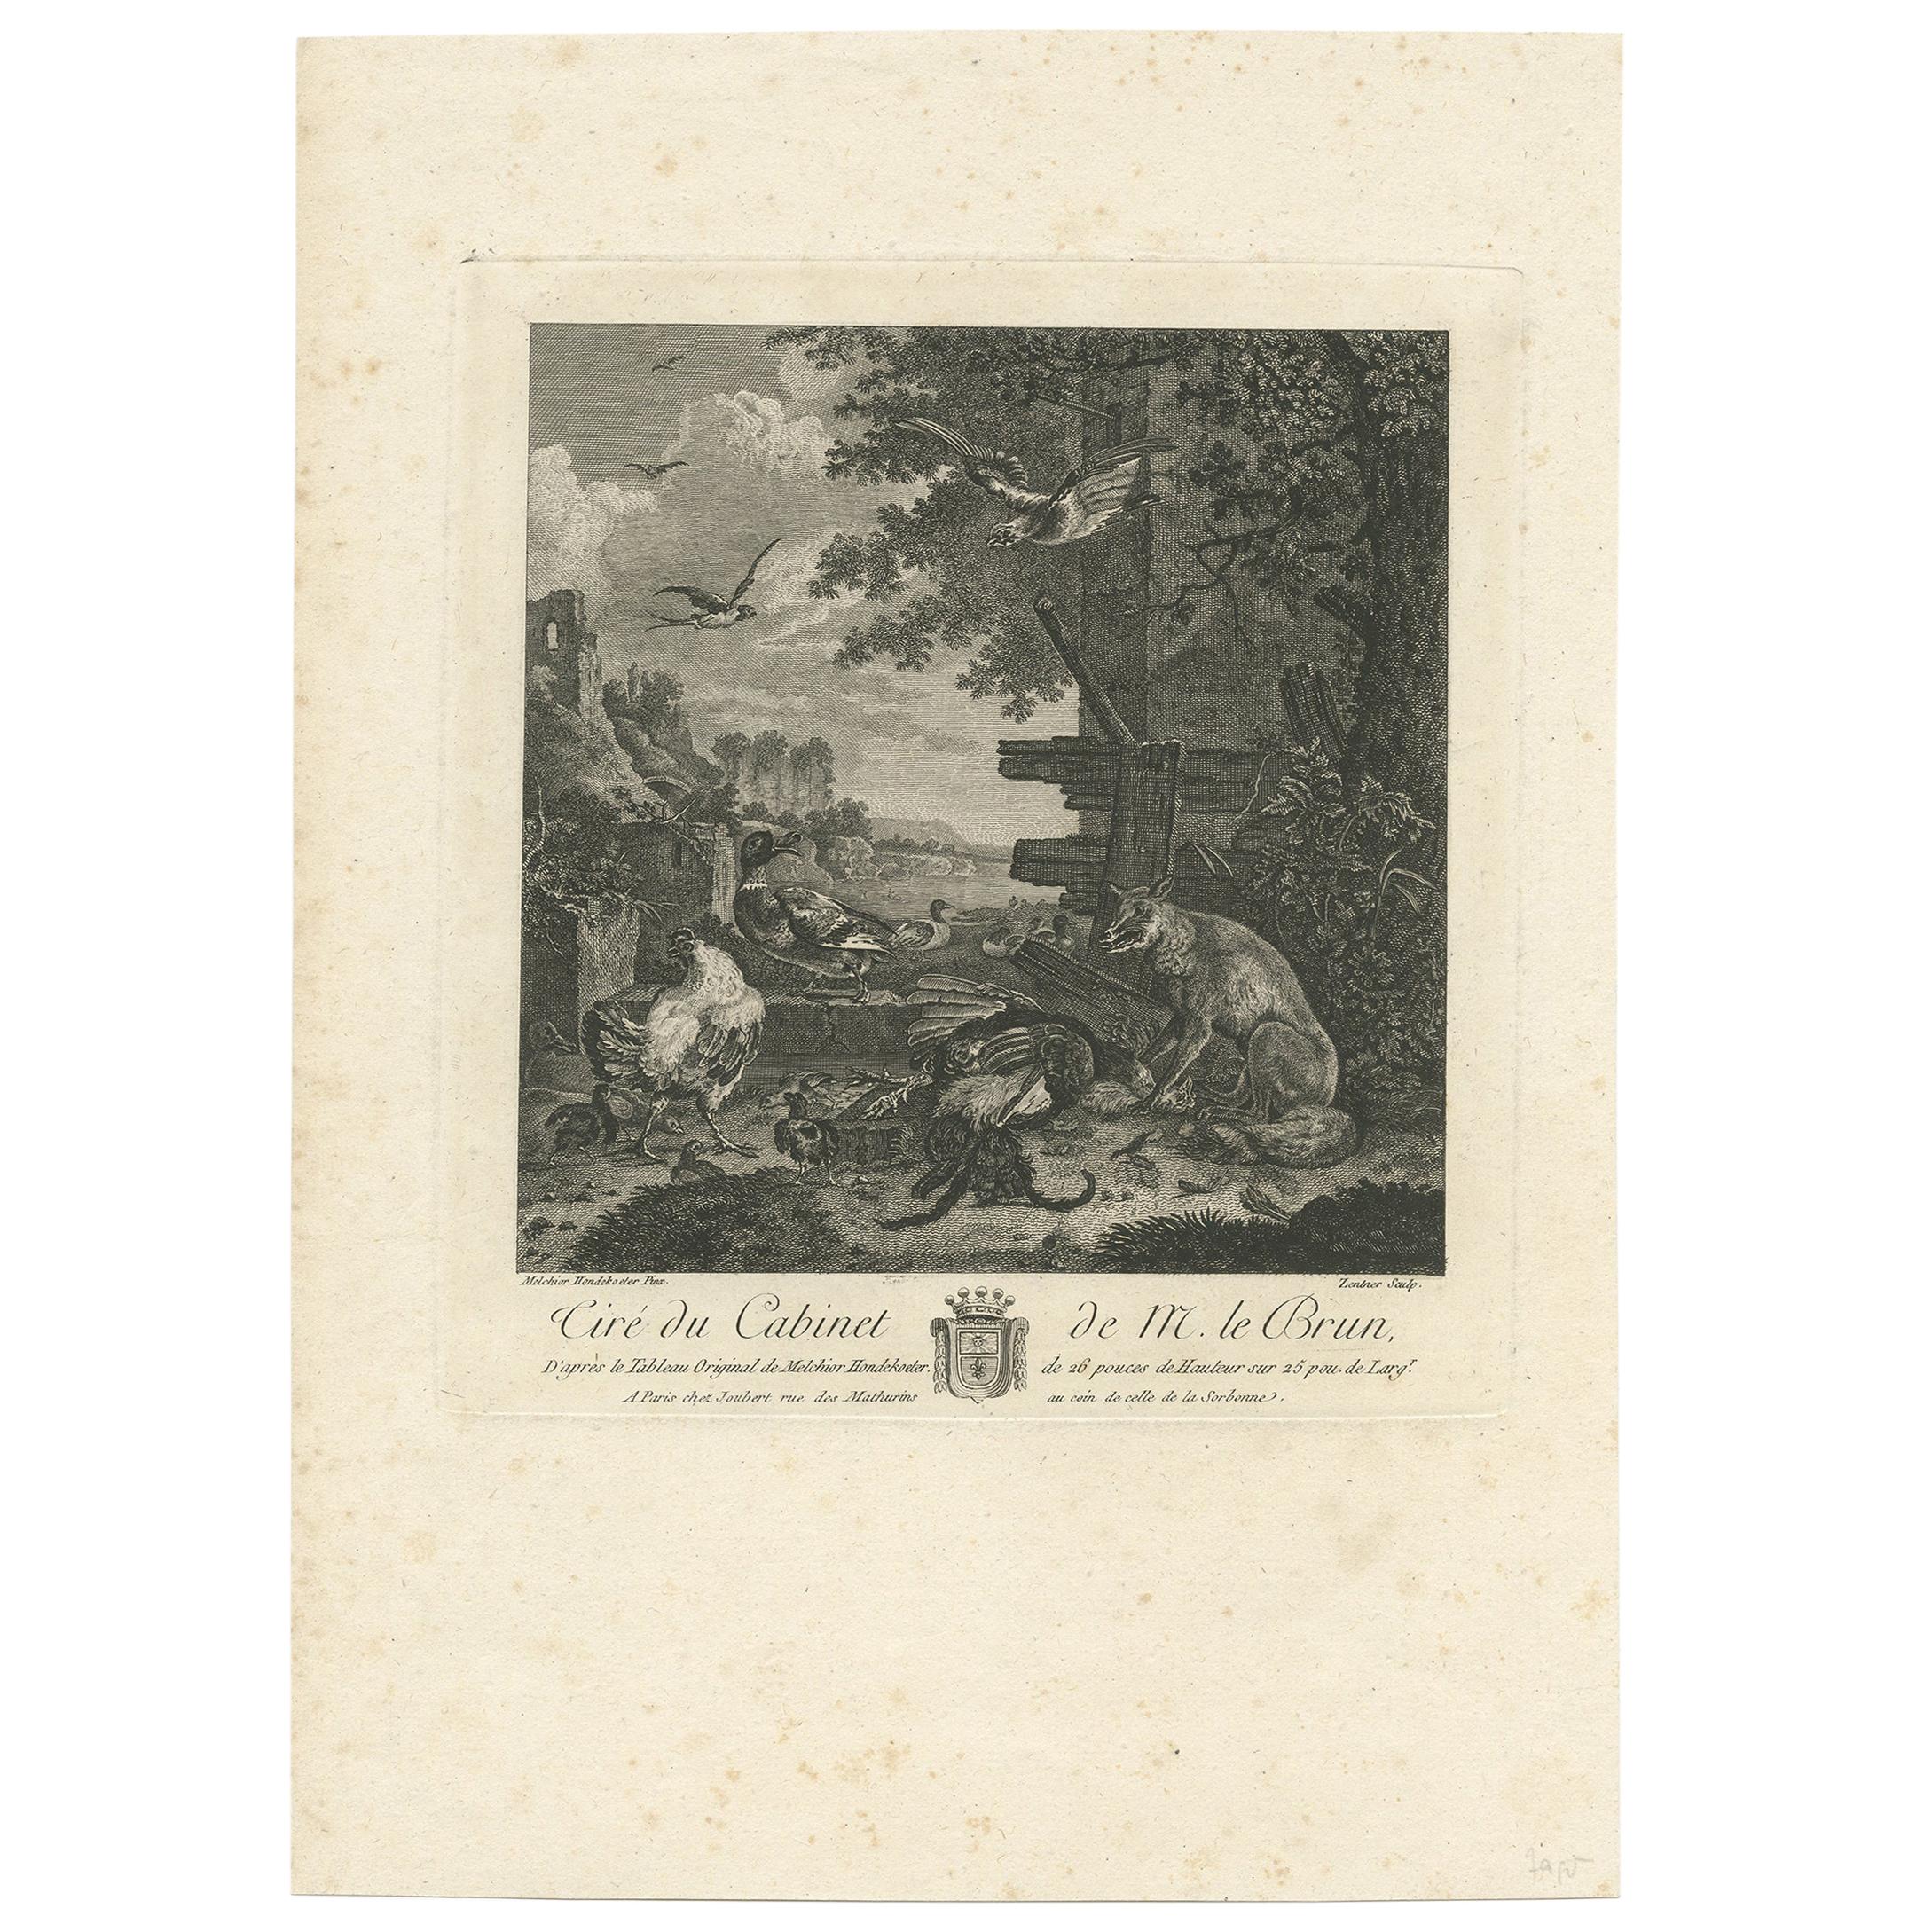 Antique Print of a River Landscape with a Fox and Birds by Le Brun (1792)